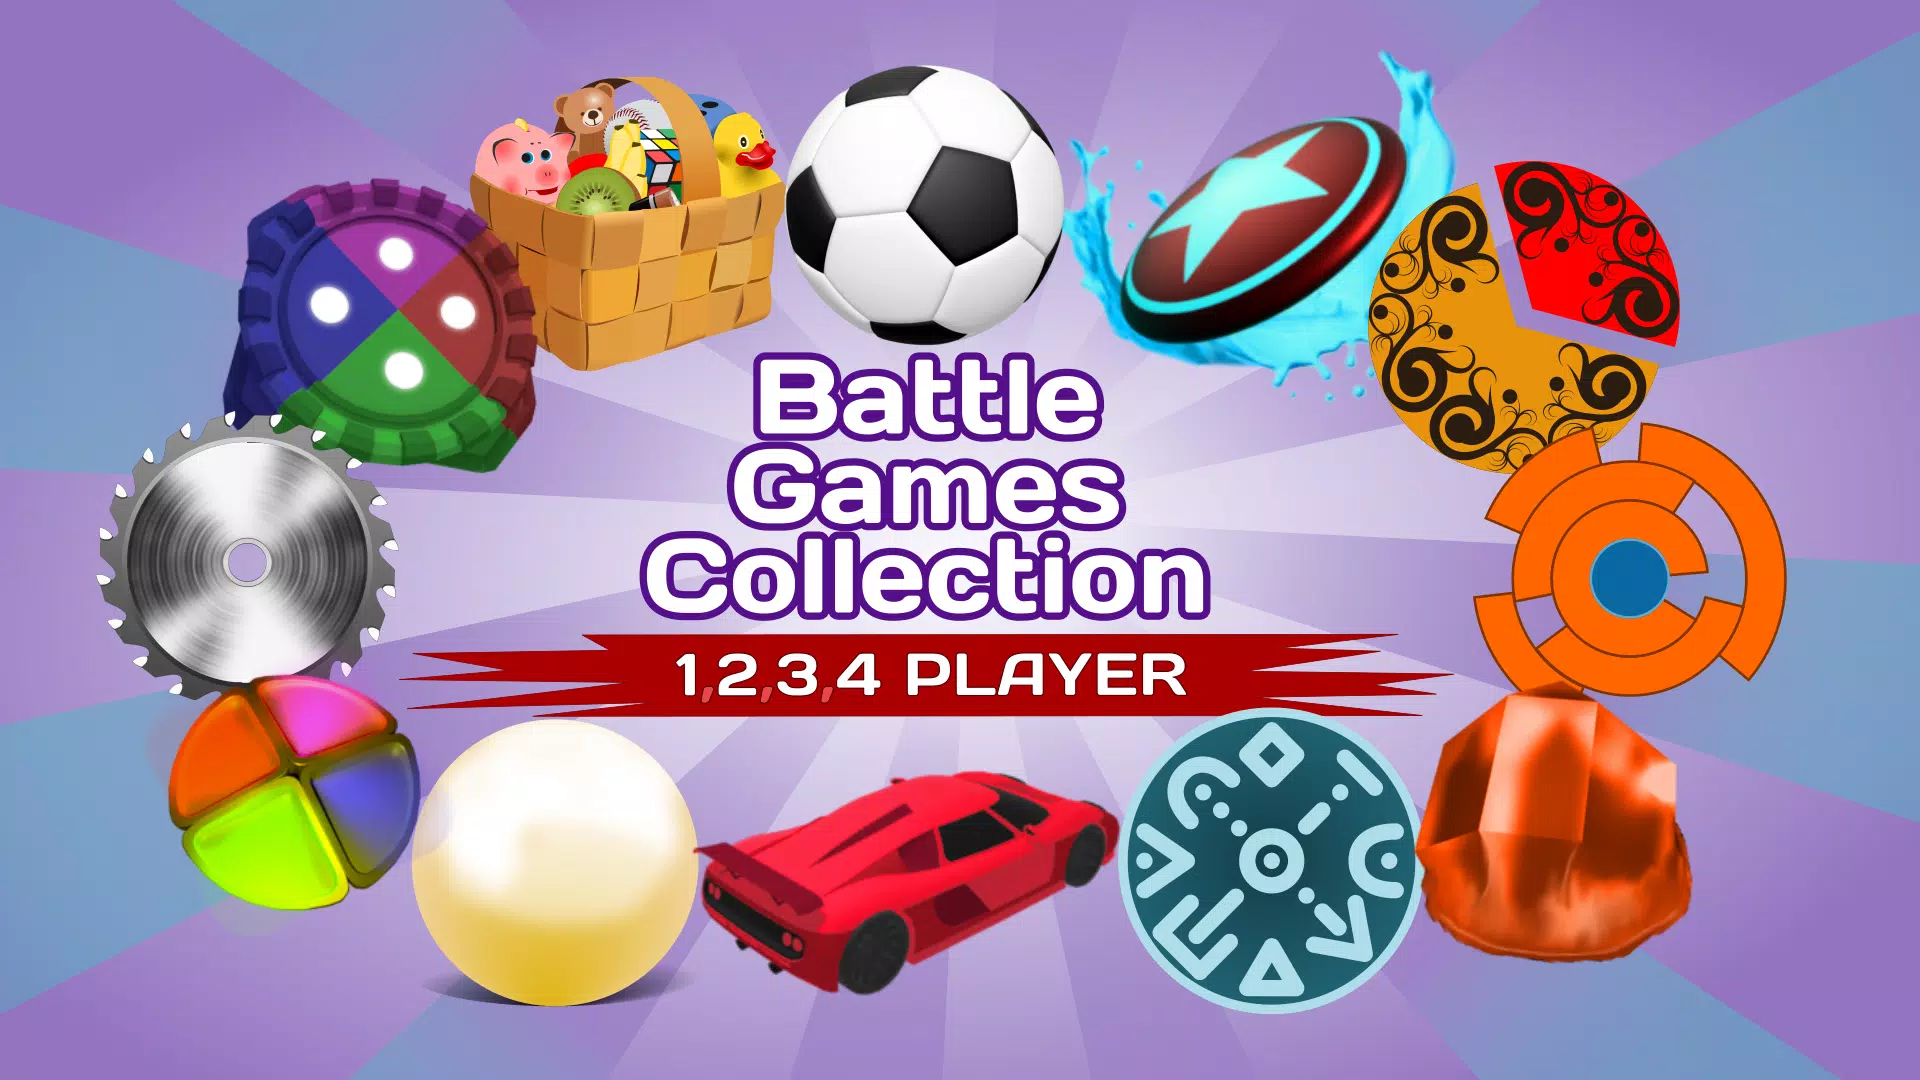 Download 2 Player games : The Challenge APK v1.7 For Android